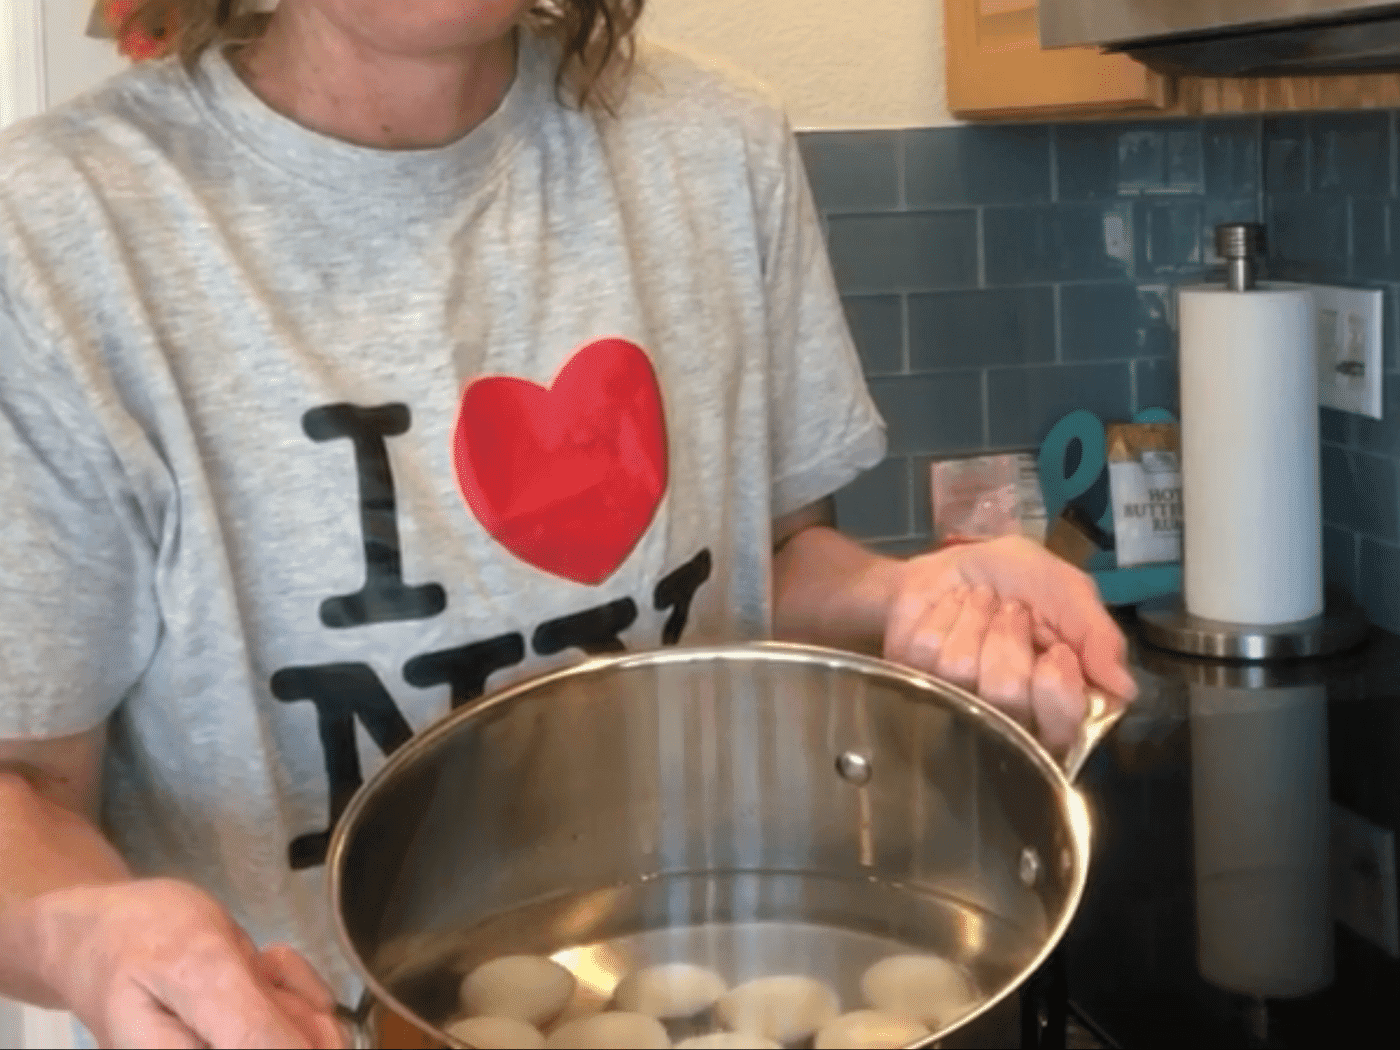 First I place the eggs in a pot of cold water and place it on the stove. Turn the water on and bring to a boil. I also use an Eggtimer - just to make sure my eggs are done.